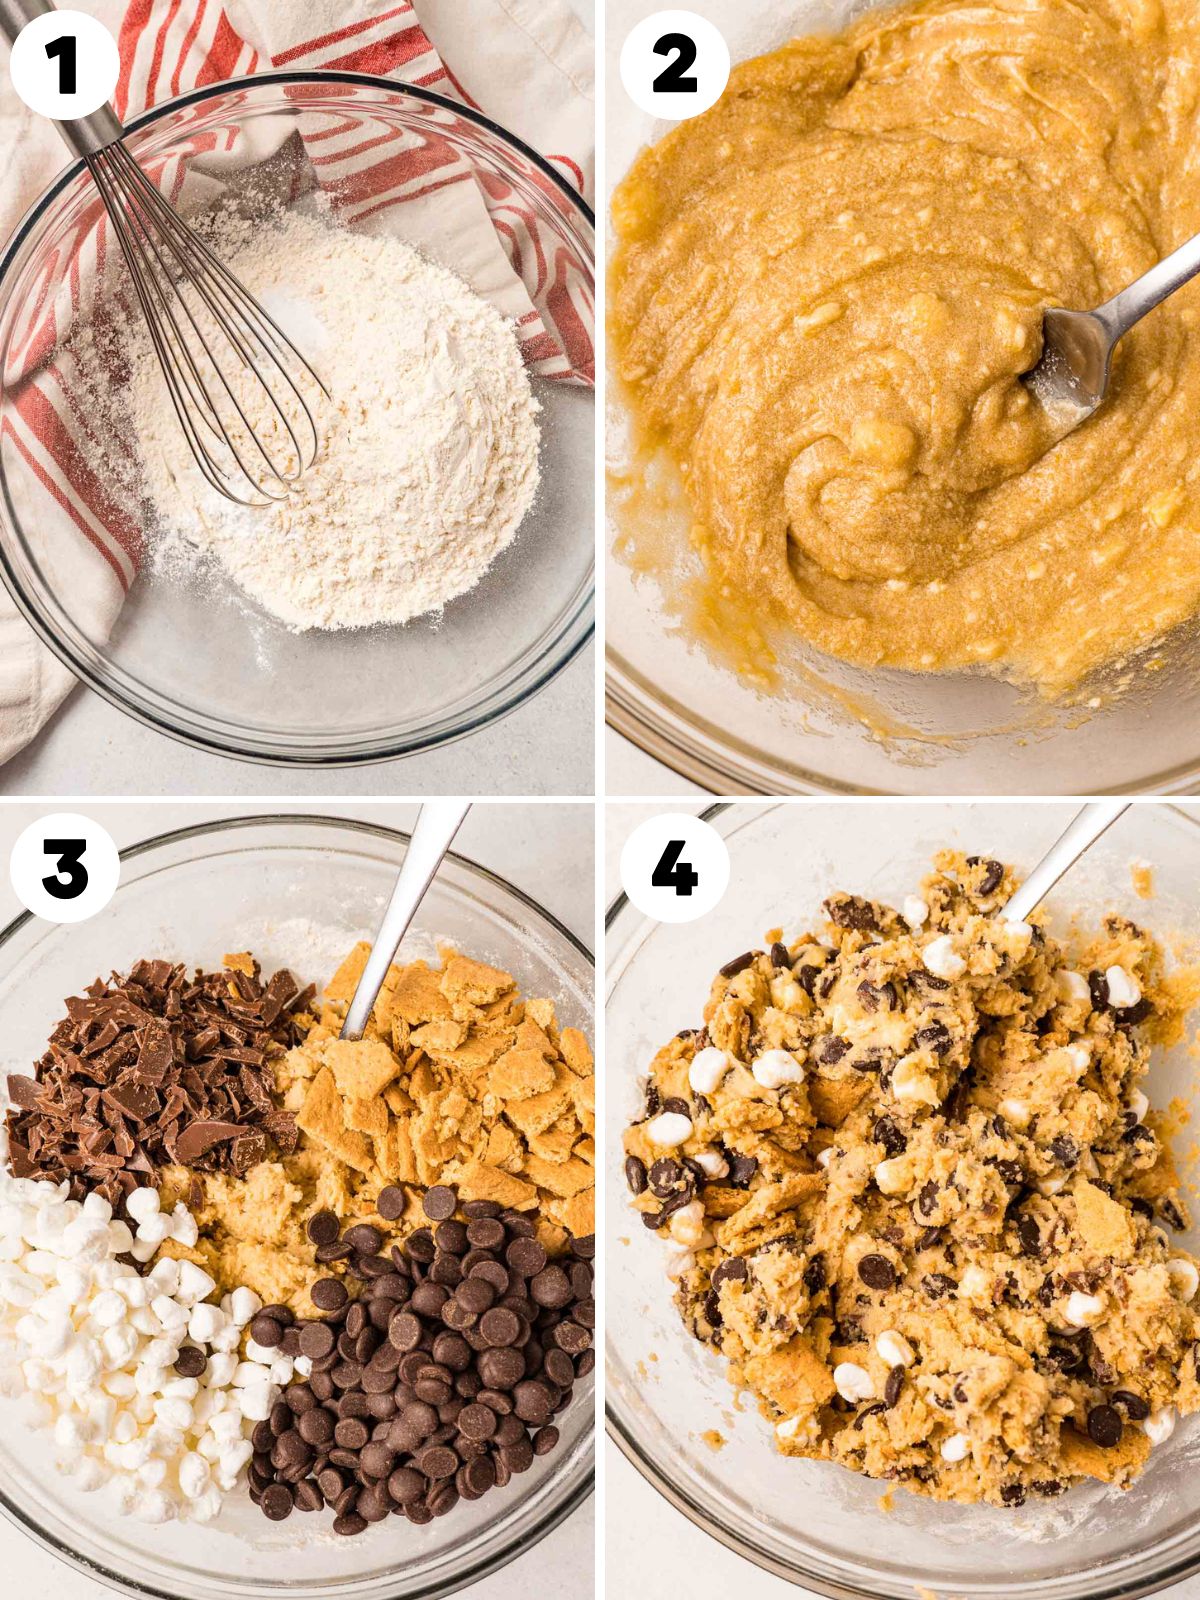 1. Mixing the dry ingredients for in a bowl. A whisk is used to mix the ingredients.
2. The batter being stirred with a wooden spoon.
3. The add-ins are graham cracker pieces, chocolate chips, chocolate bar pieces, and mini marshmallows. 
4. Cookie dough in a glass bowl.